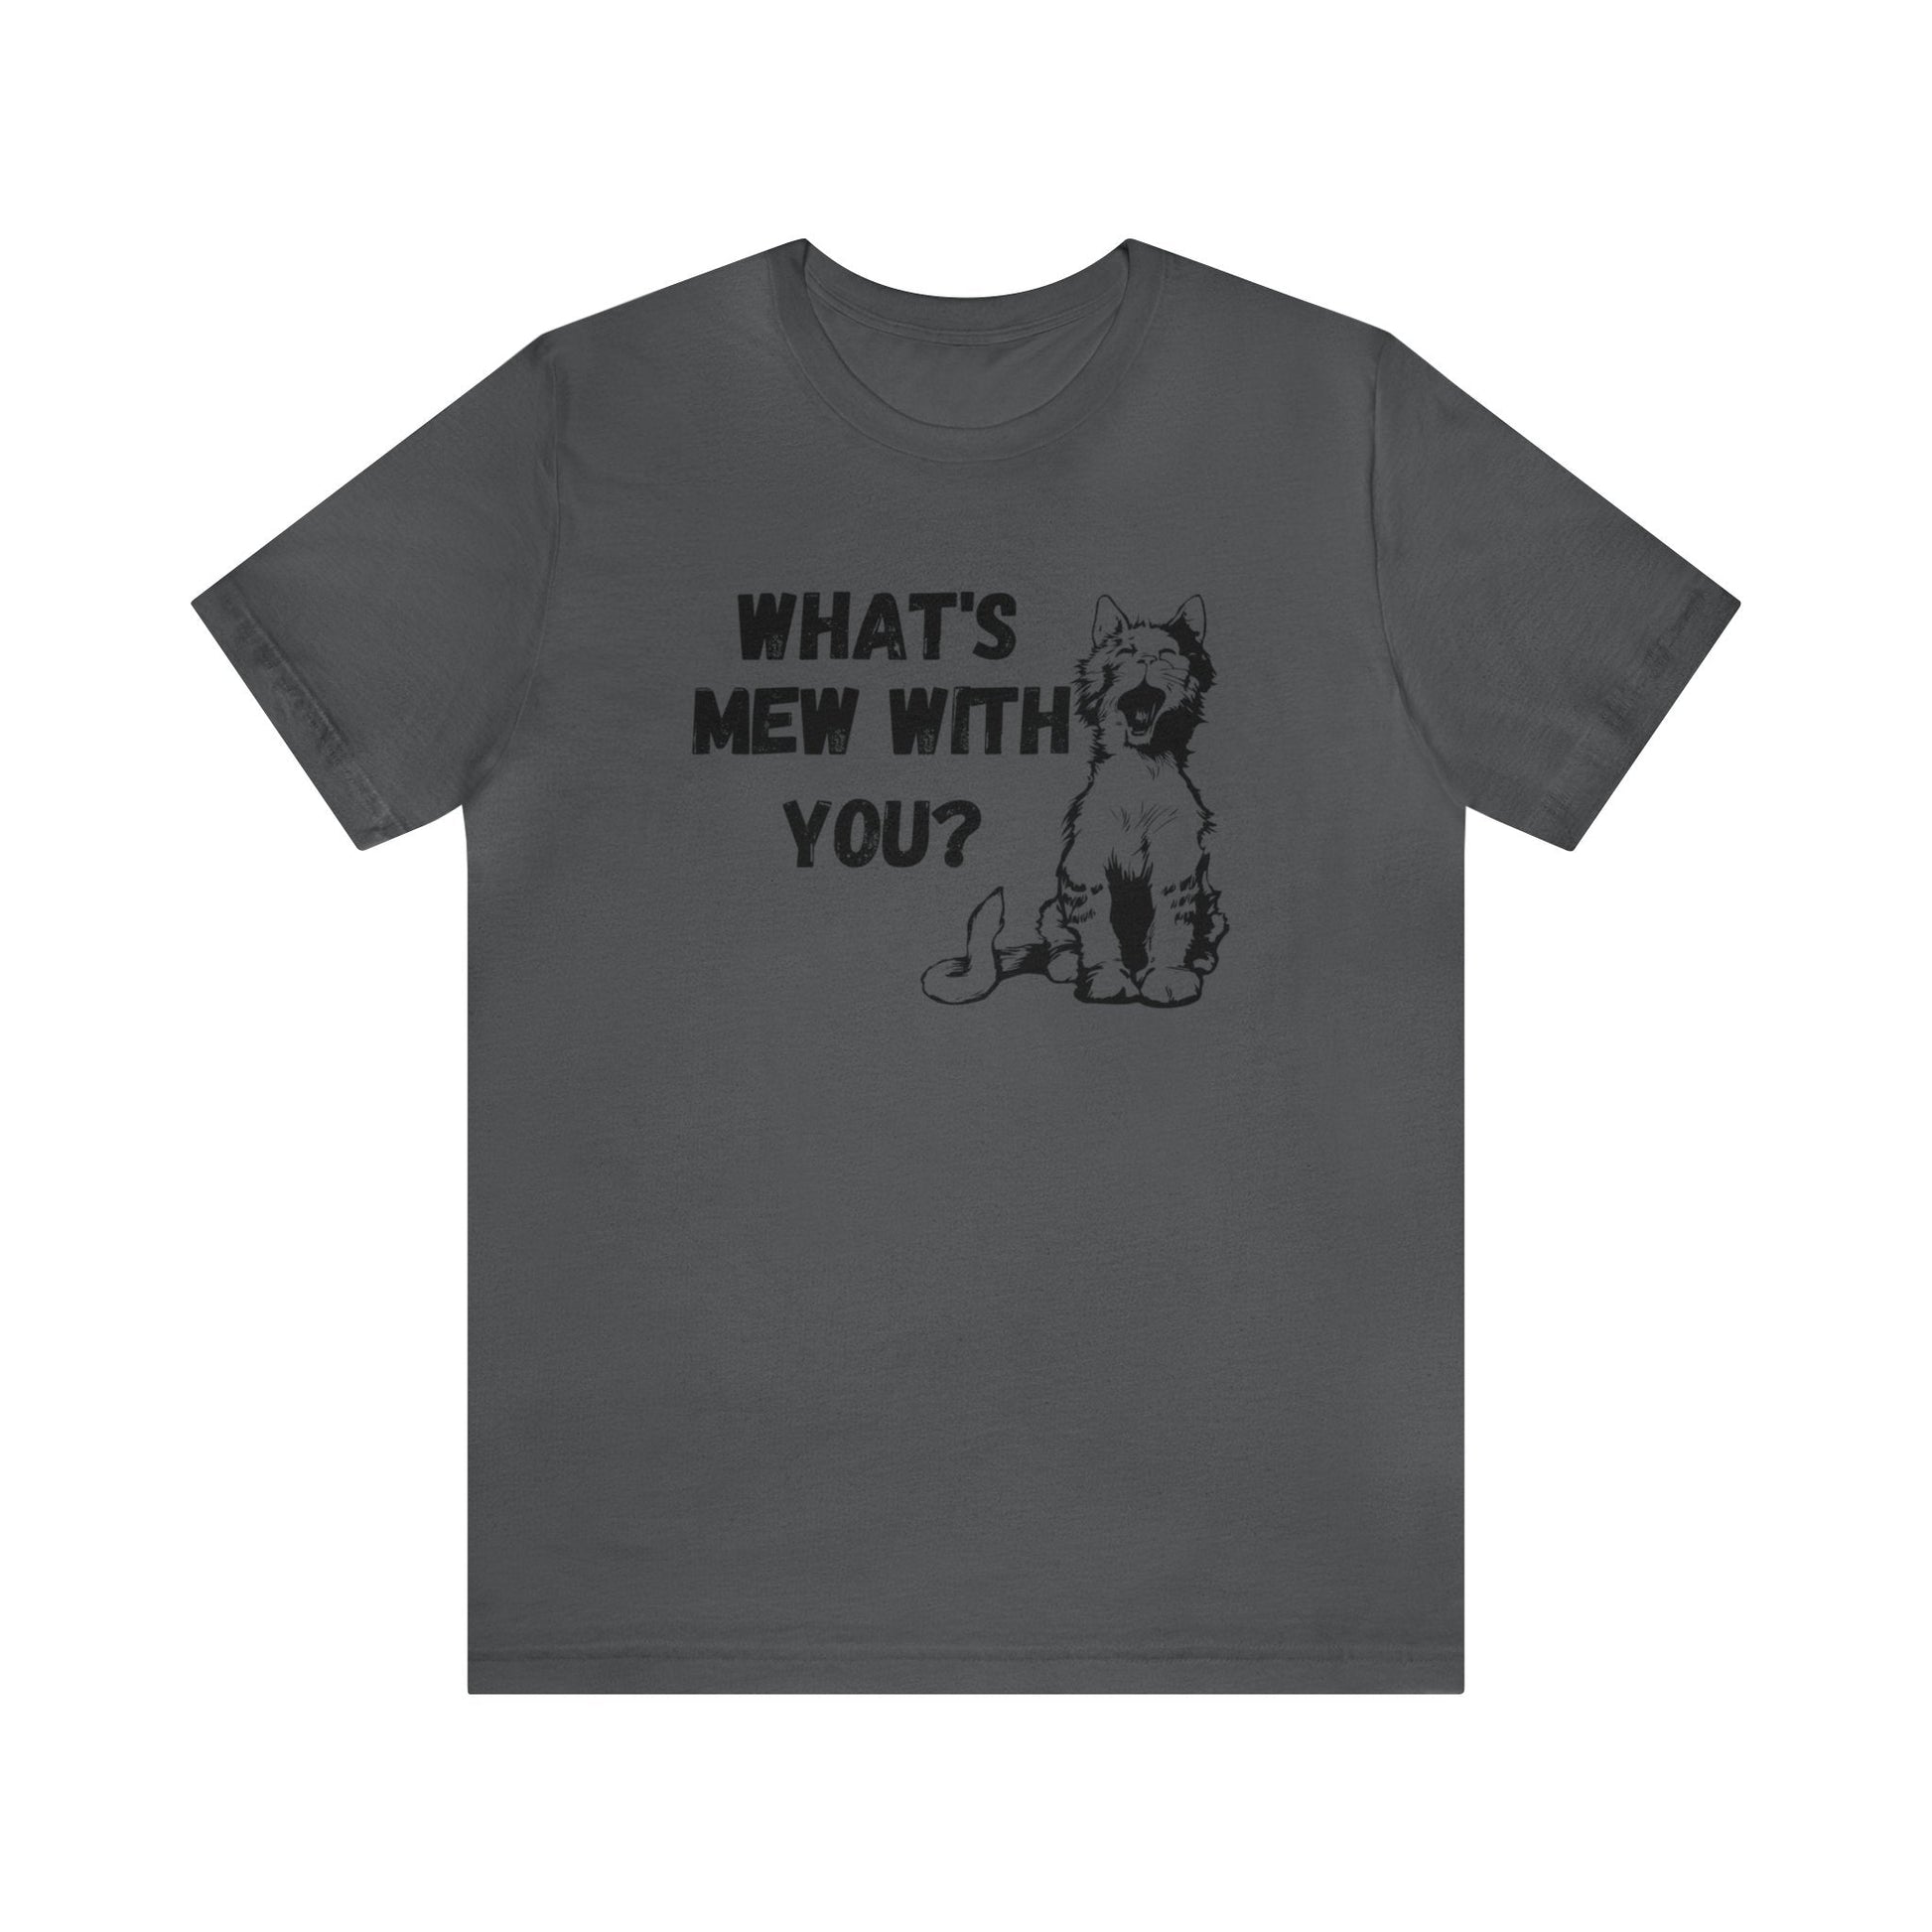 What's Mew with You? T-shirt. - InkArt Fashions